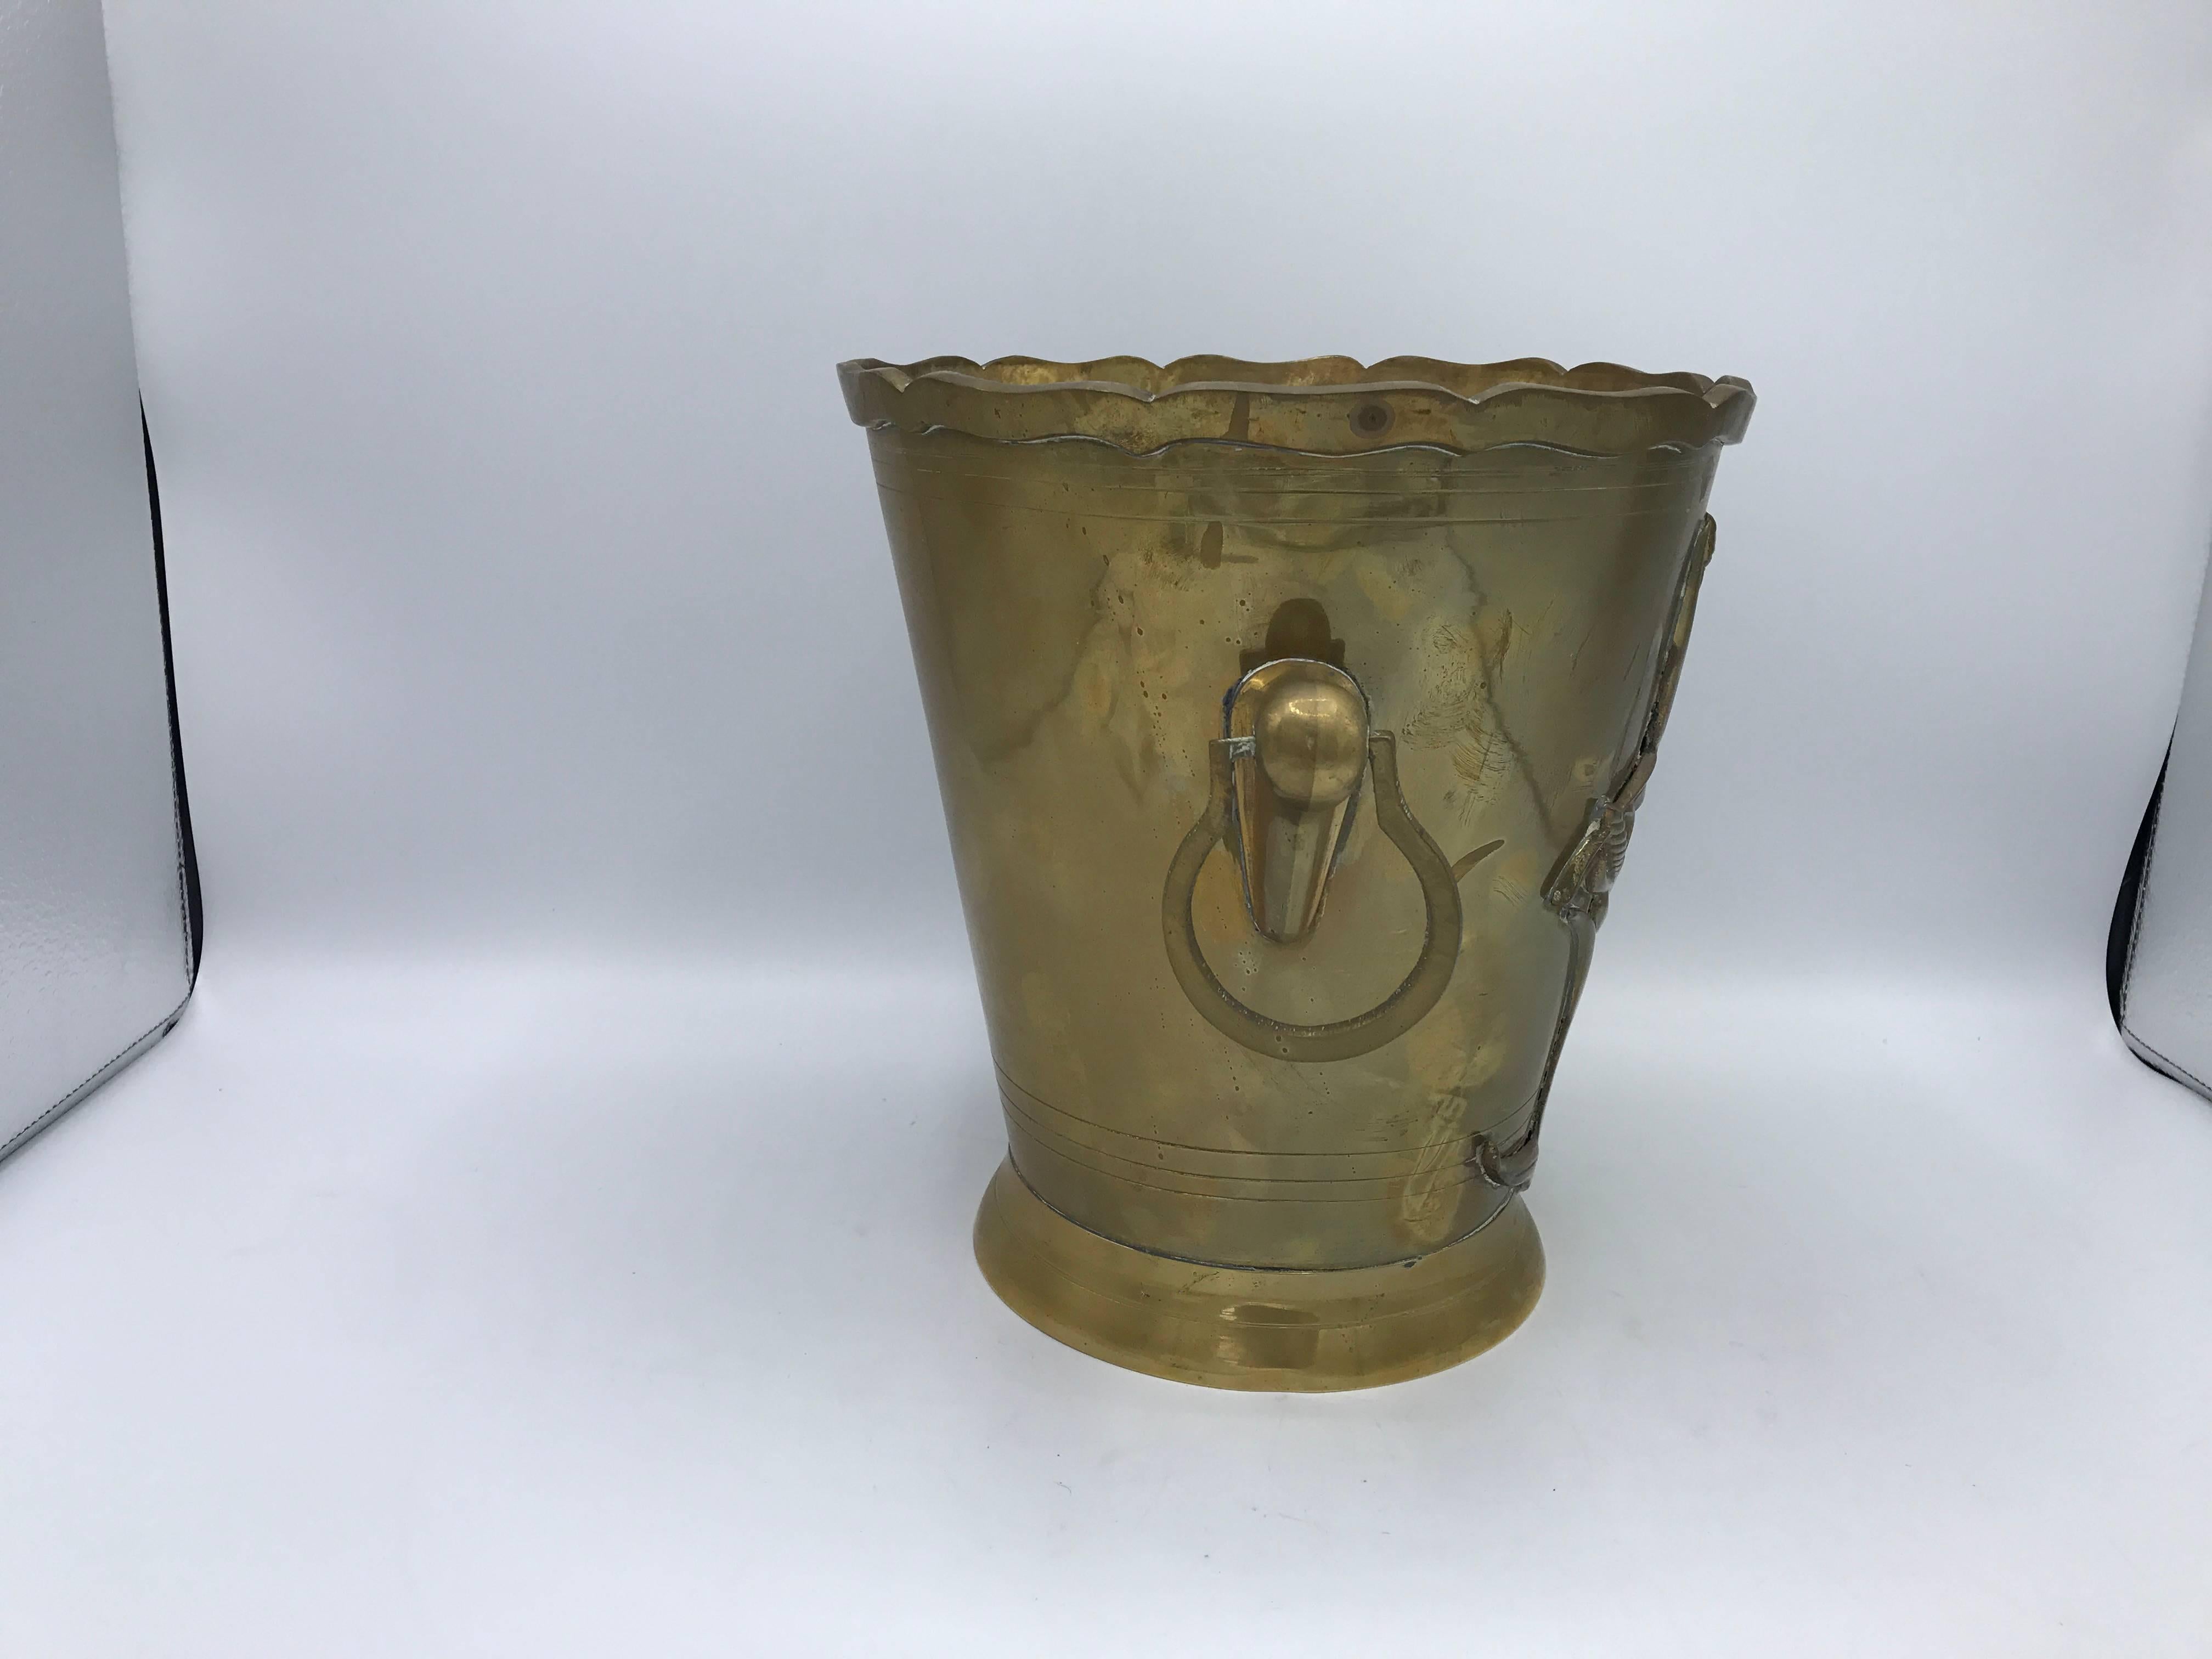 20th Century 1970s Brass Waste Basket with Tulip Floral Motif and Handles